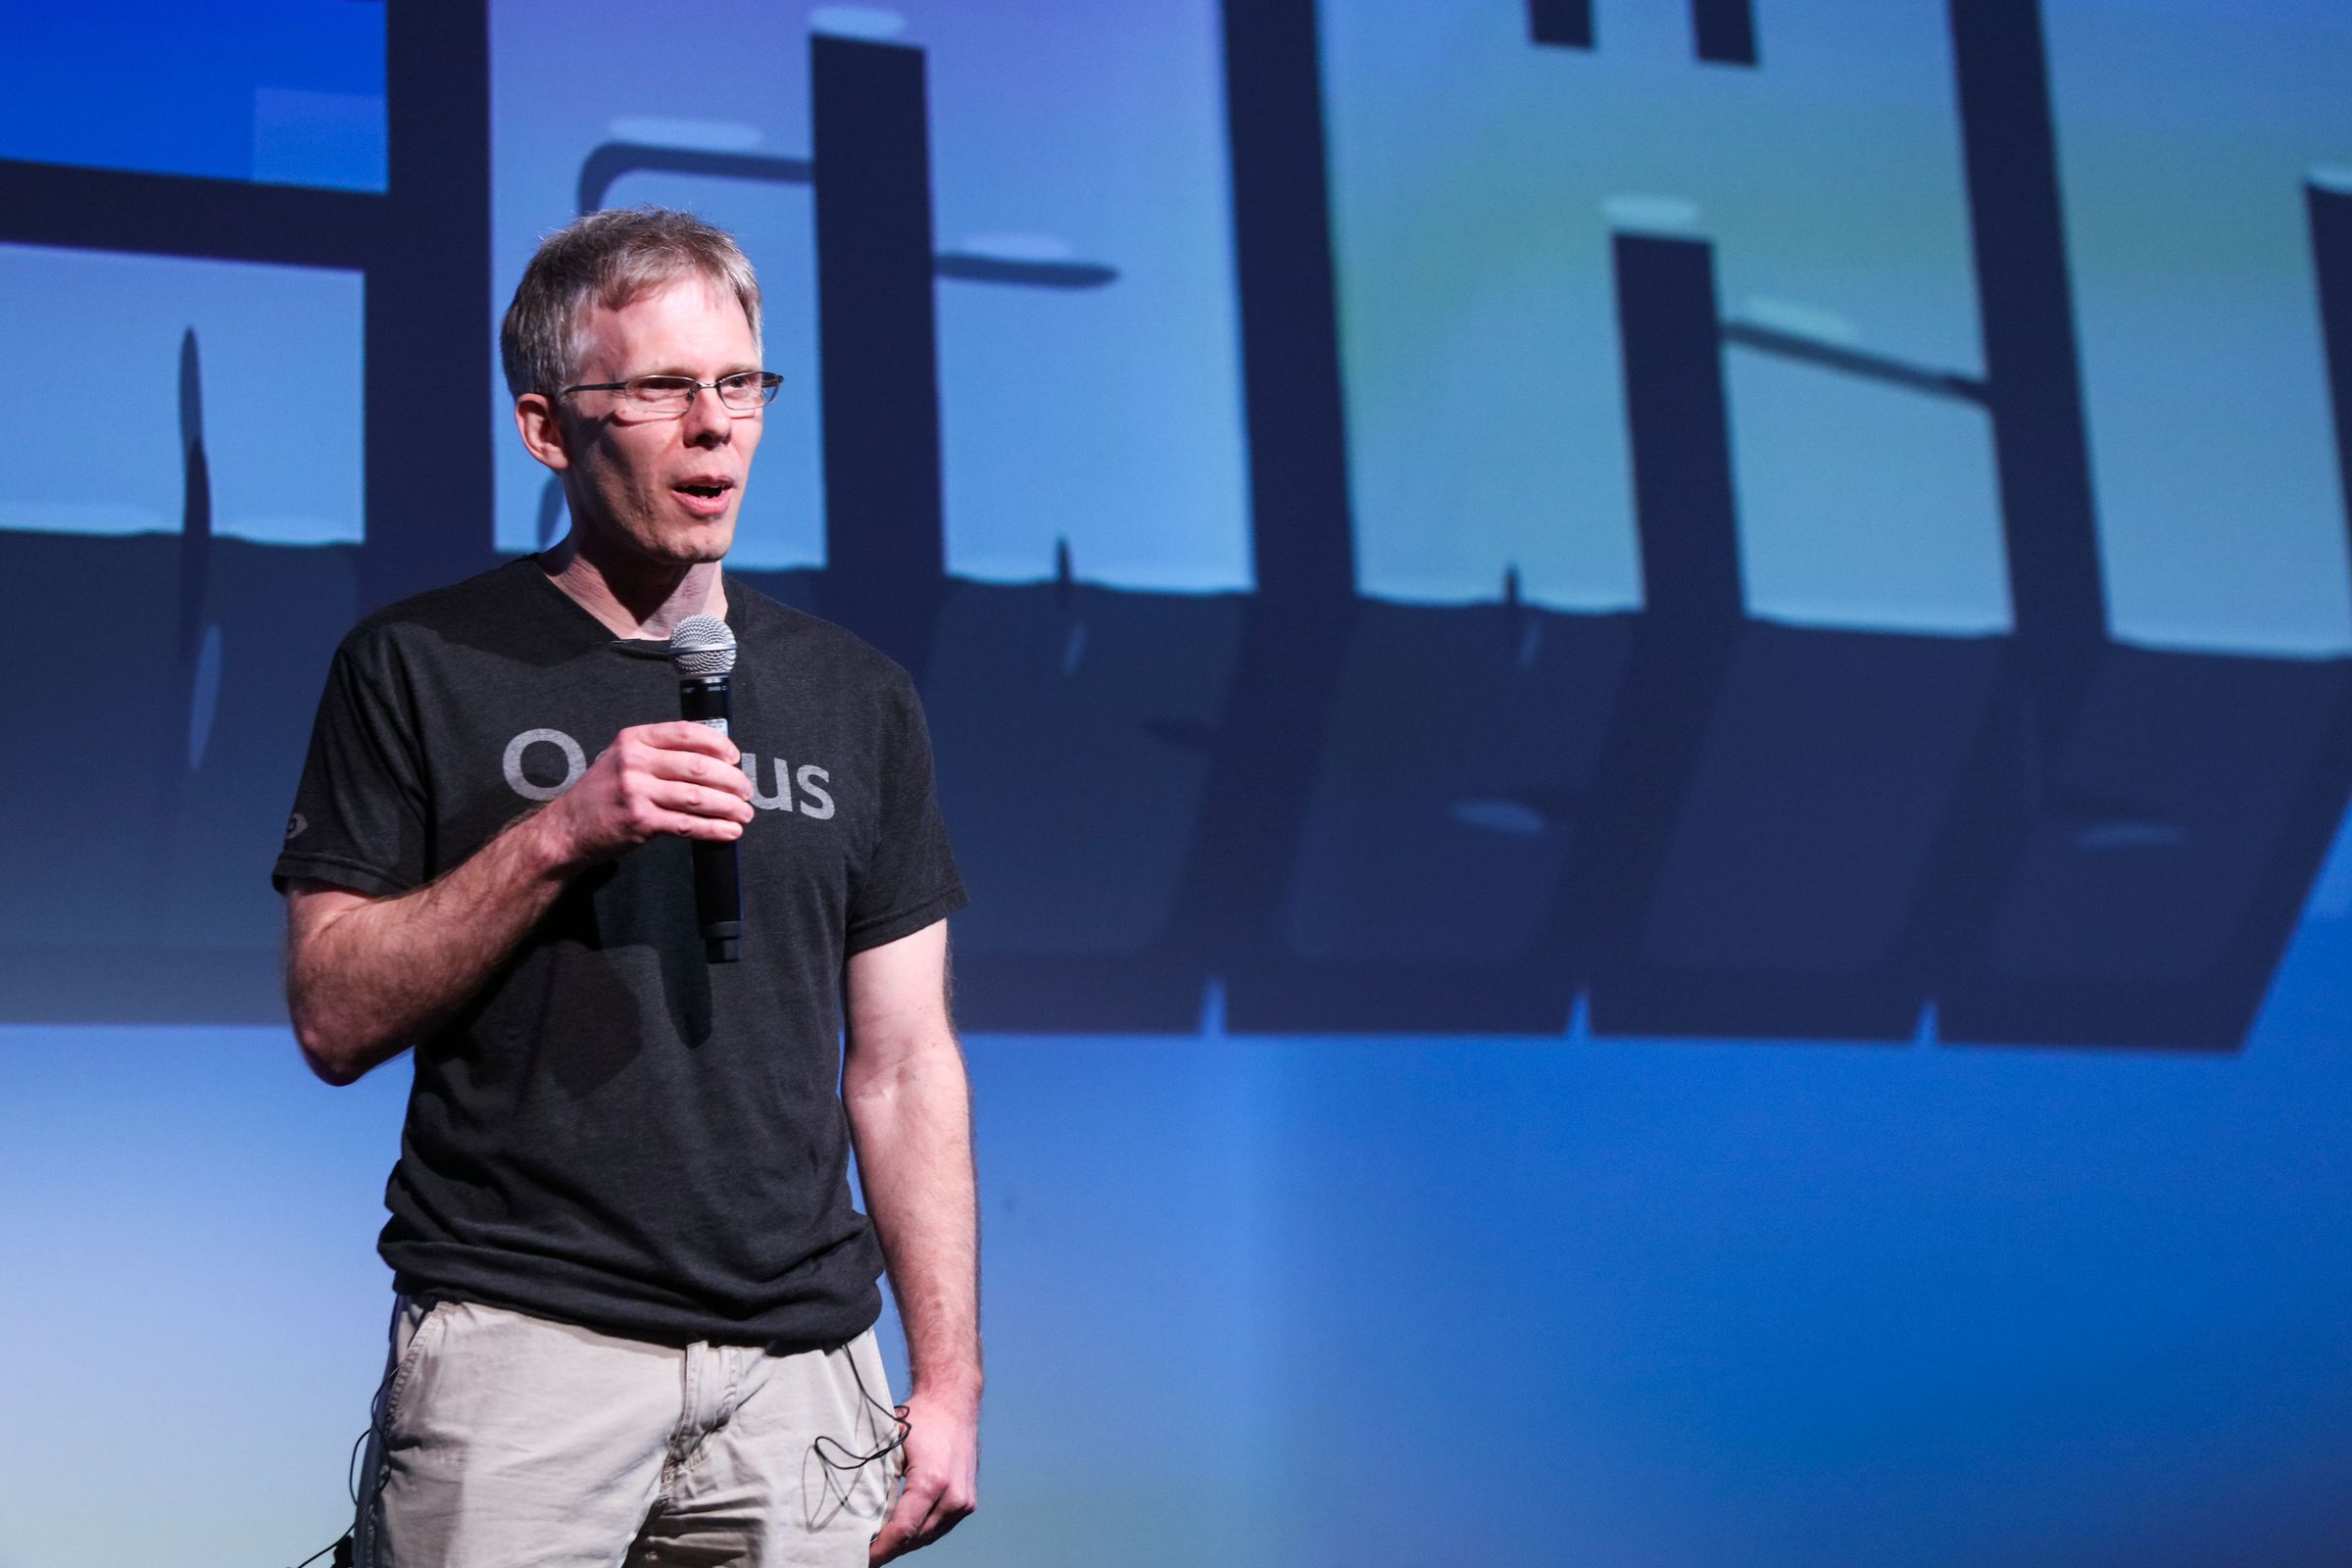 A photo of John Carmack onstage.